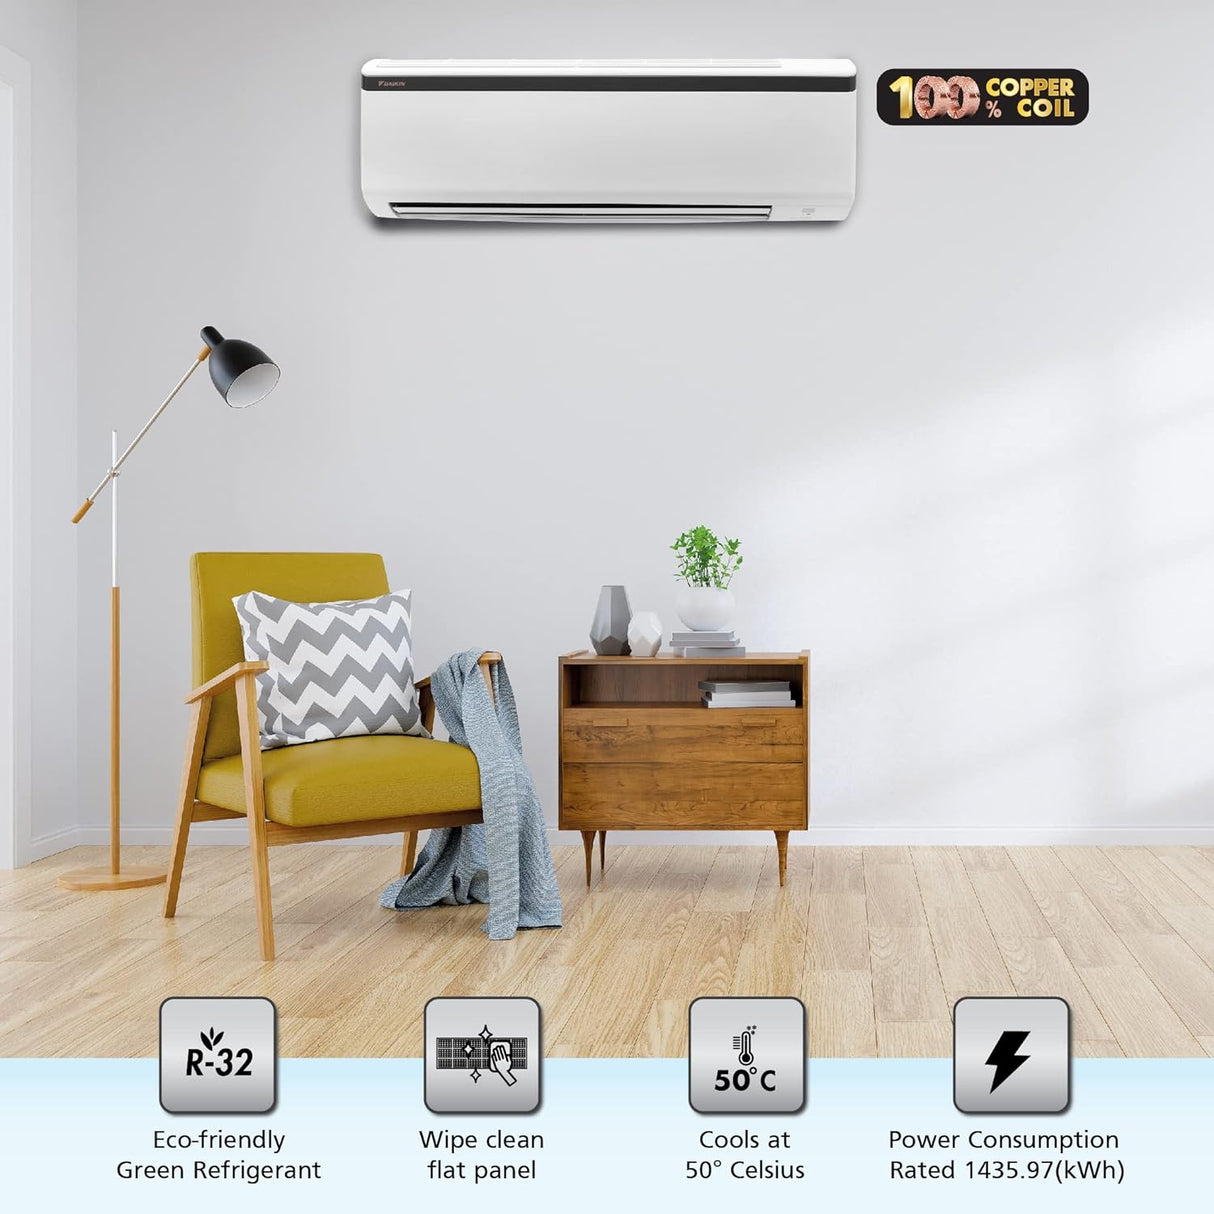 Daikin 1.8T 1 Star Split AC - Advanced Cooling with Copper, Antibacterial Filter, White.